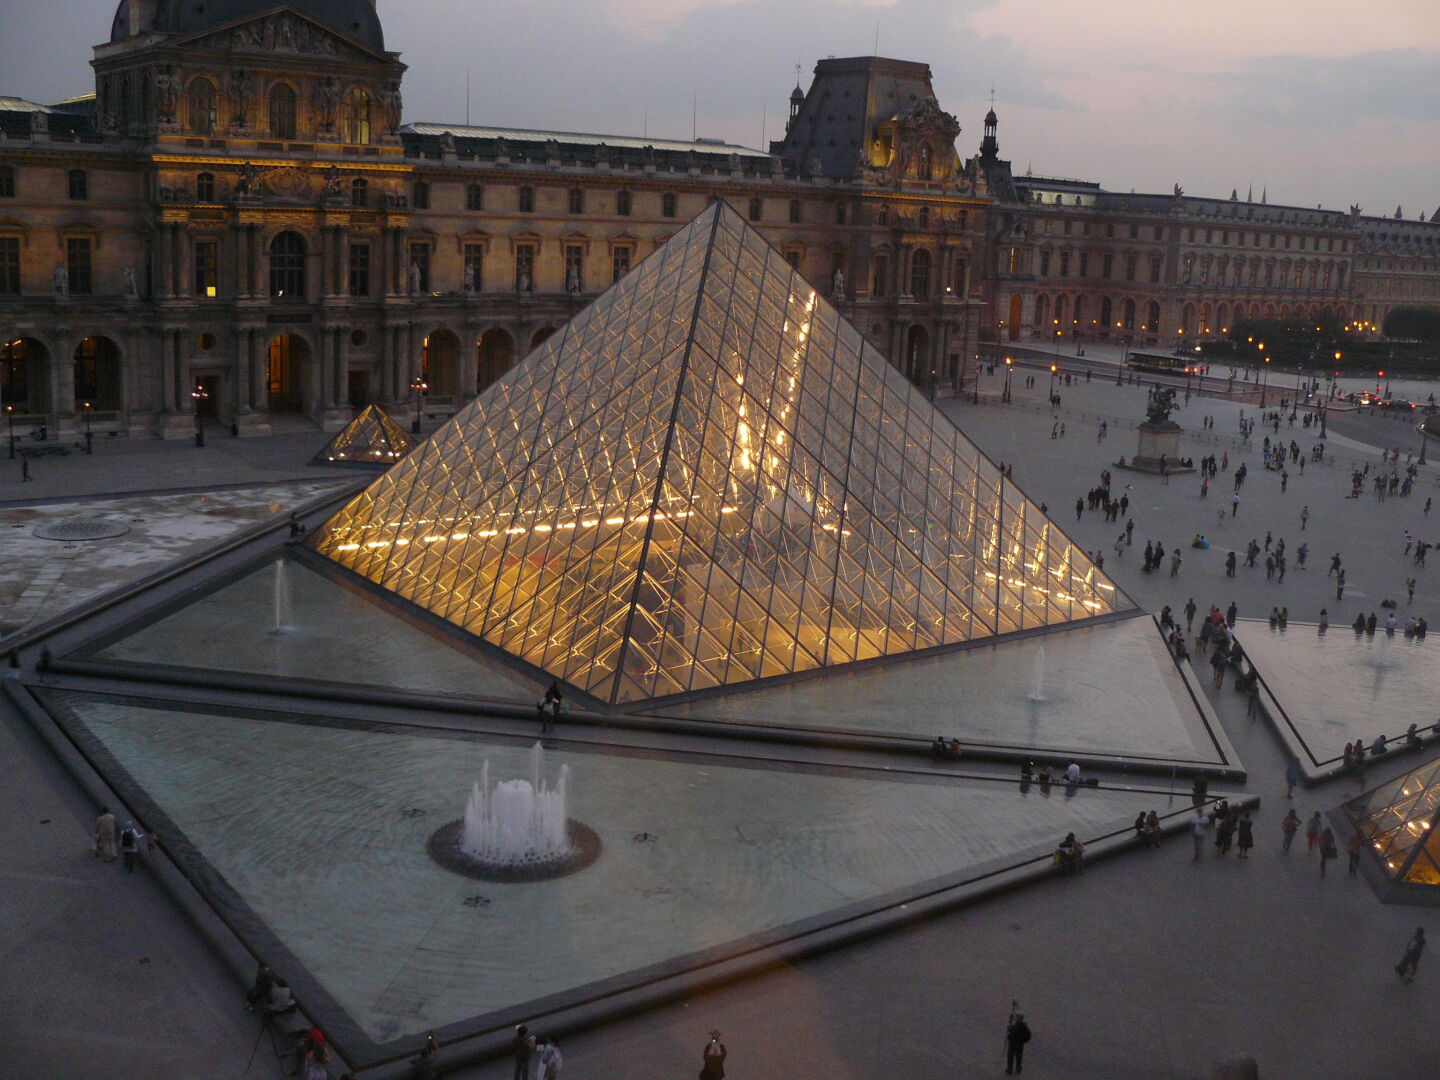 The famous glass pyramid in front of the louvre.